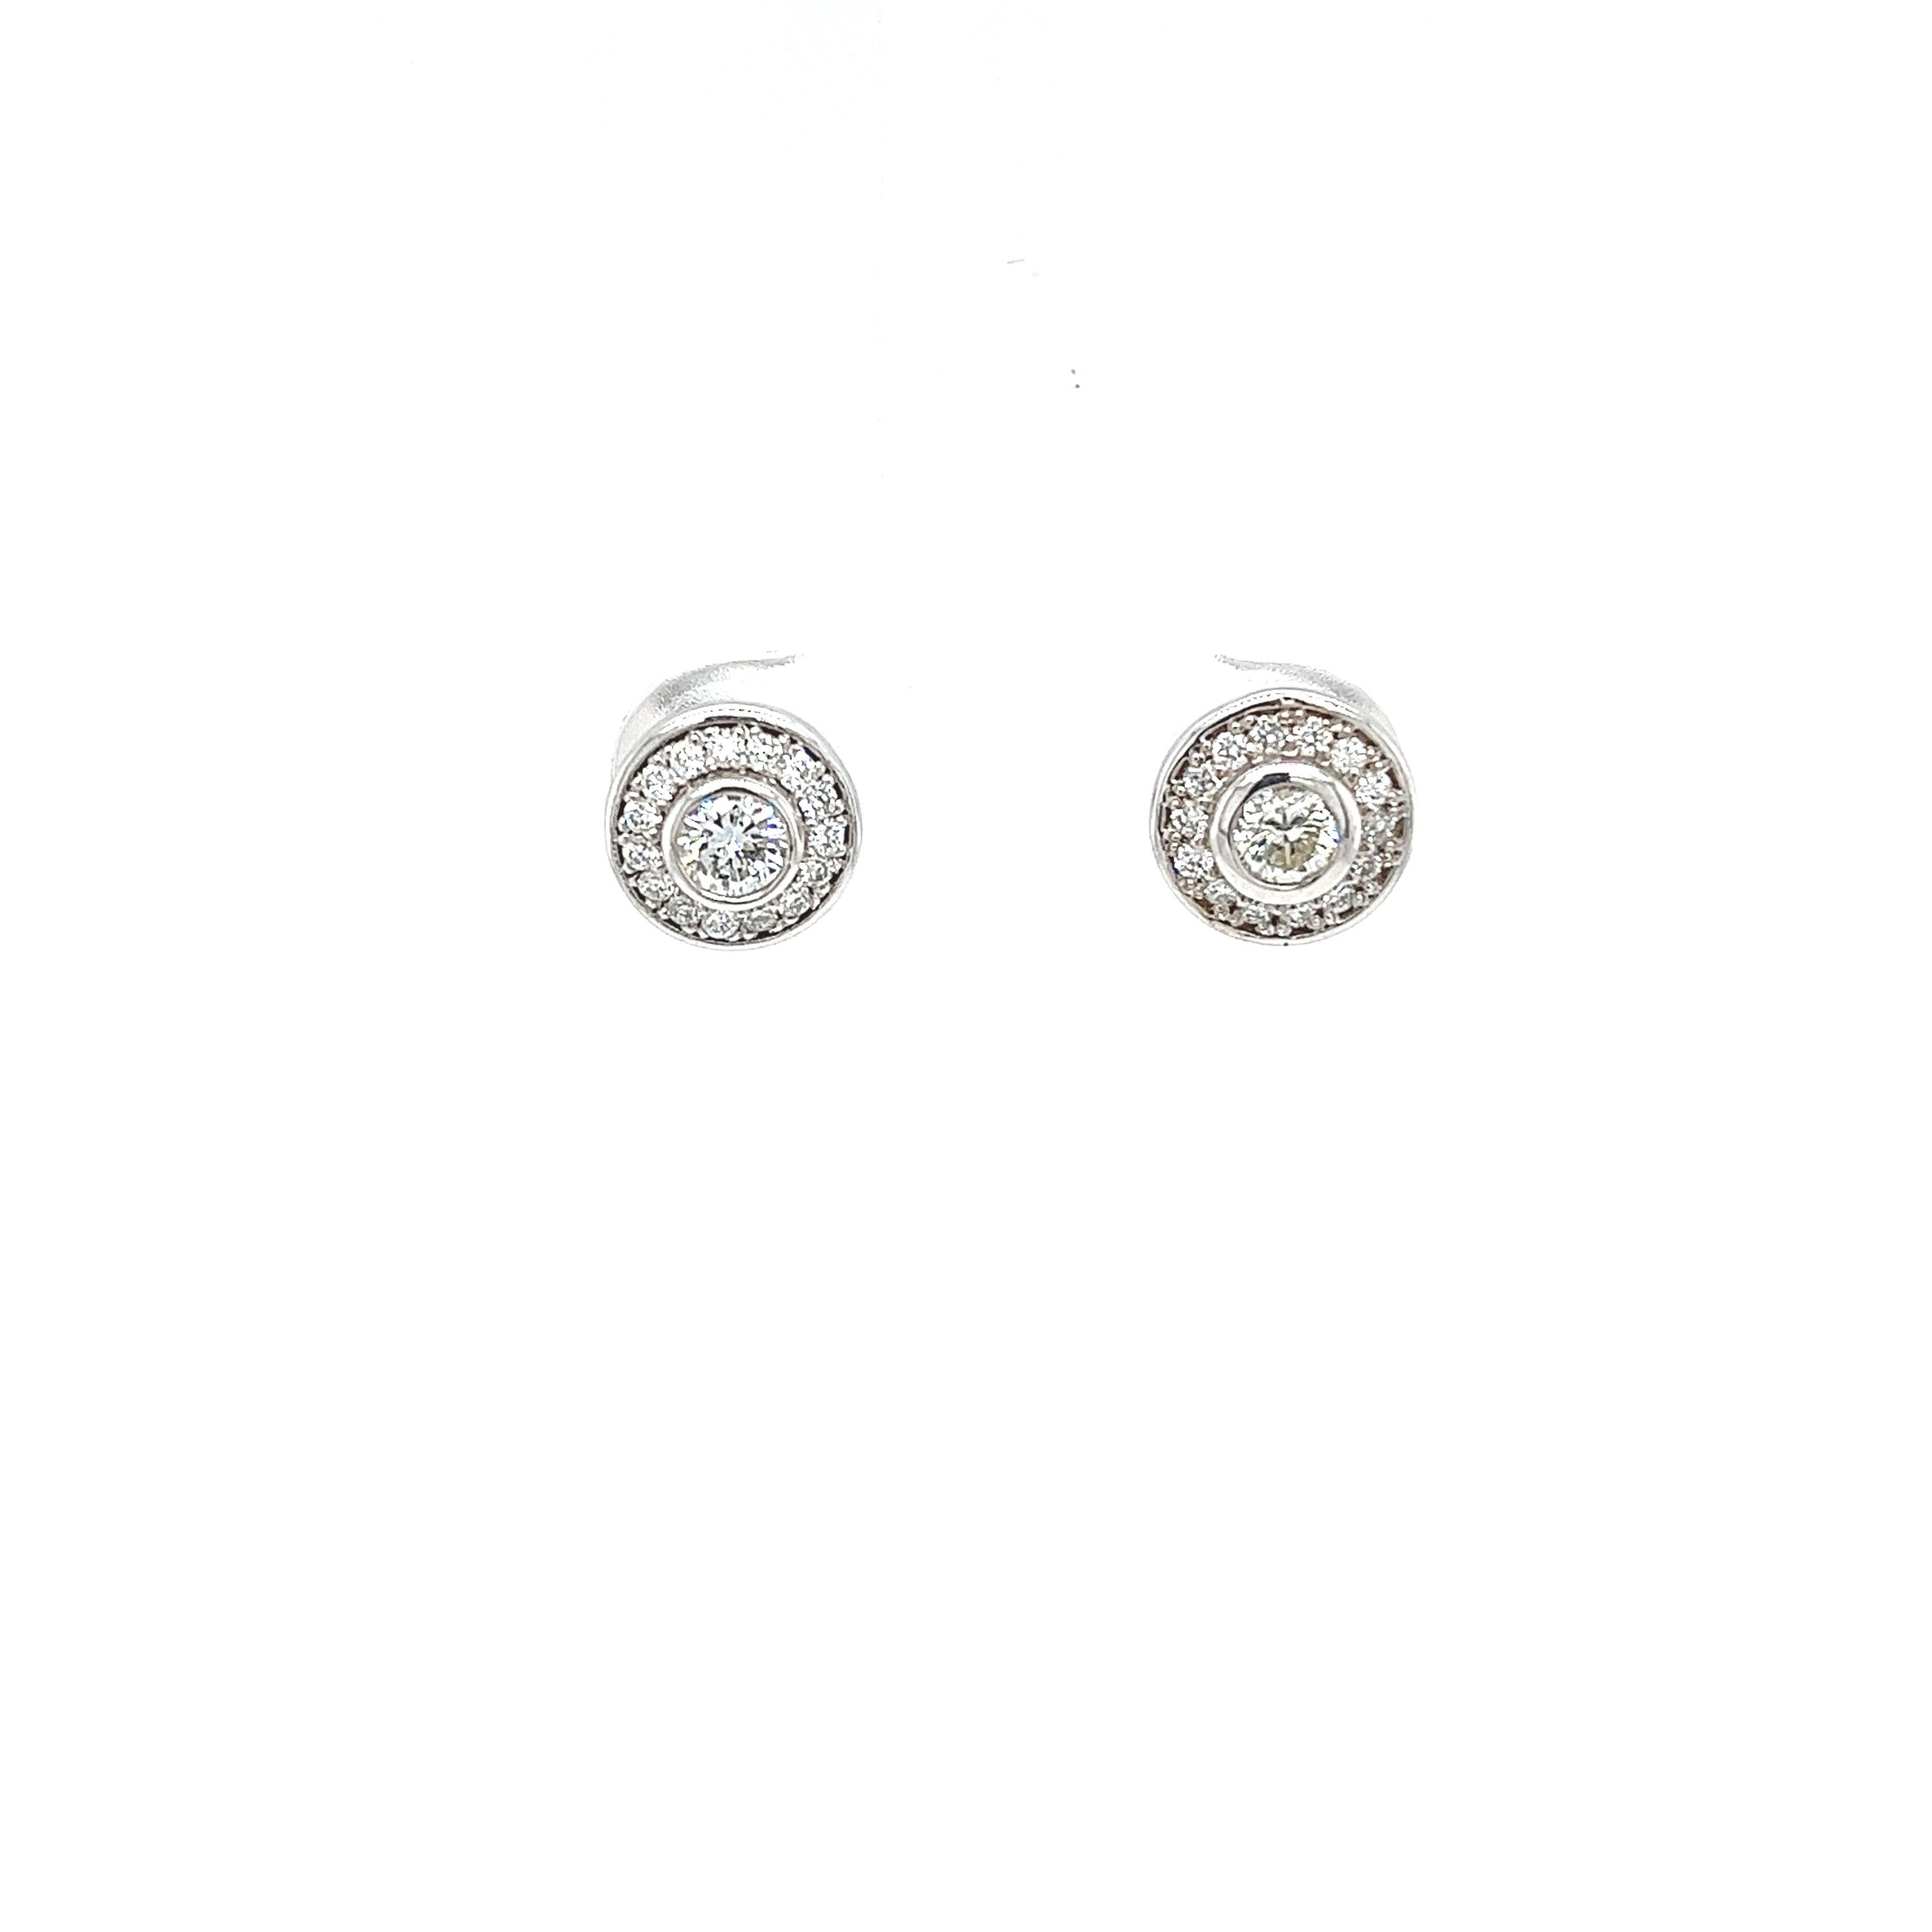 18ct White Gold Halo Earring Set With 0.55ct of Round Brilliant Cut Diamonds

The pair features a total of 0.55ct of round diamonds set in a halo design, in 18ct white gold. The halo setting is a classic design and is a timeless trend that goes well